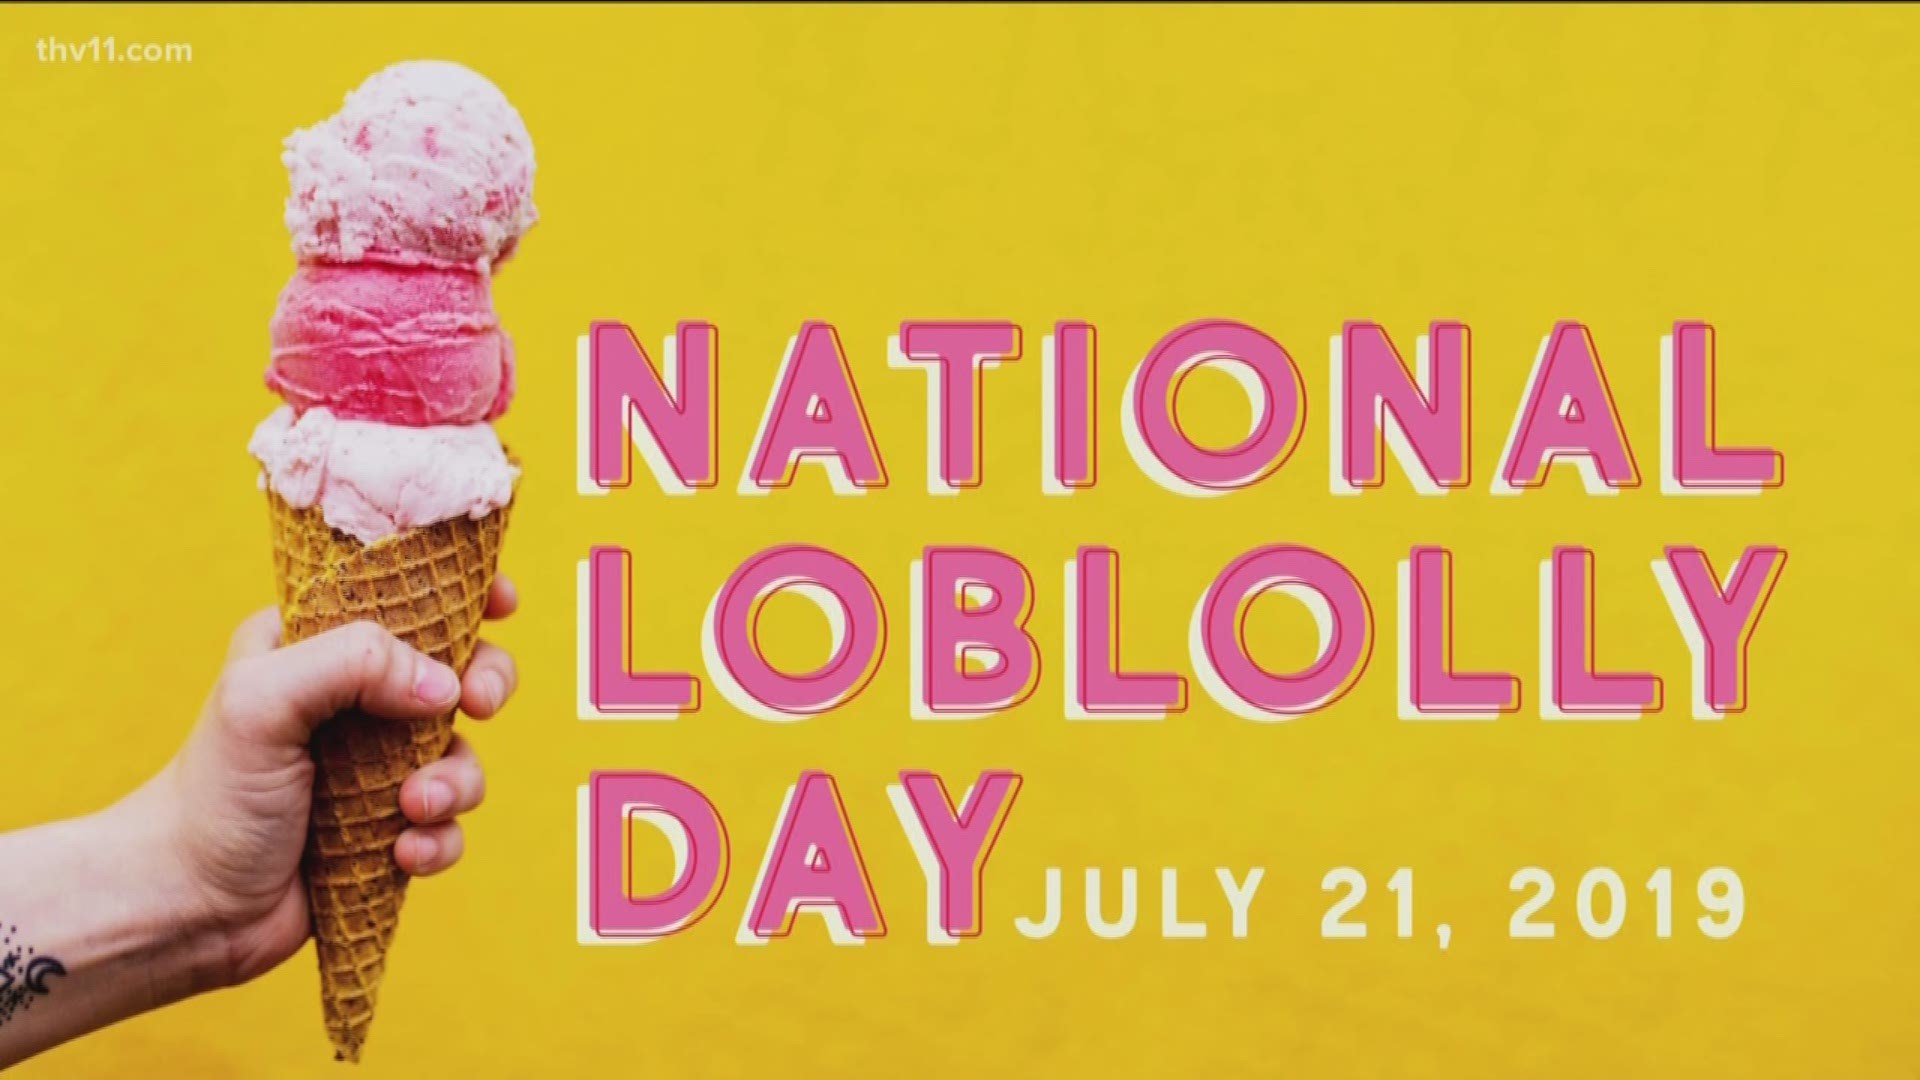 Tomorrow is one of the most important days of the year... National Ice Cream Day! And you don't have to go far to take part.